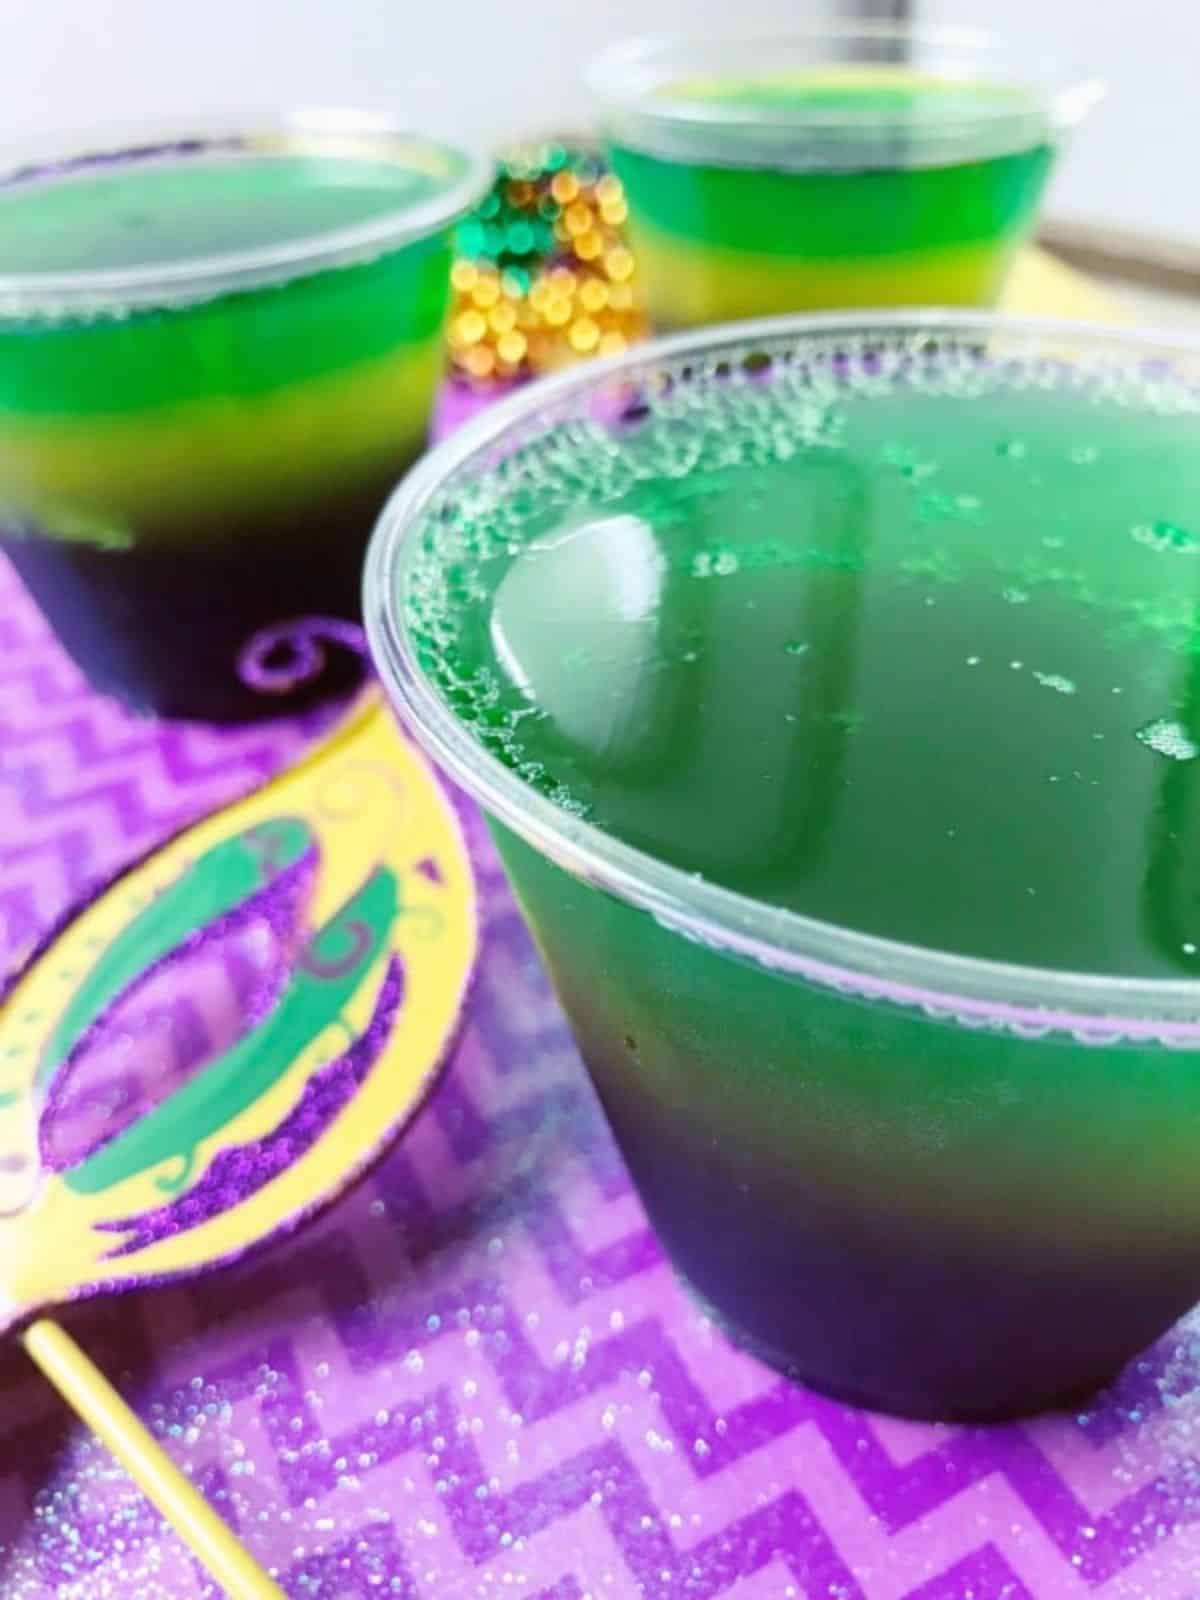 Layered Jello for Mardi Gras in cups on purple paper. Mardi Gras mask on the side.